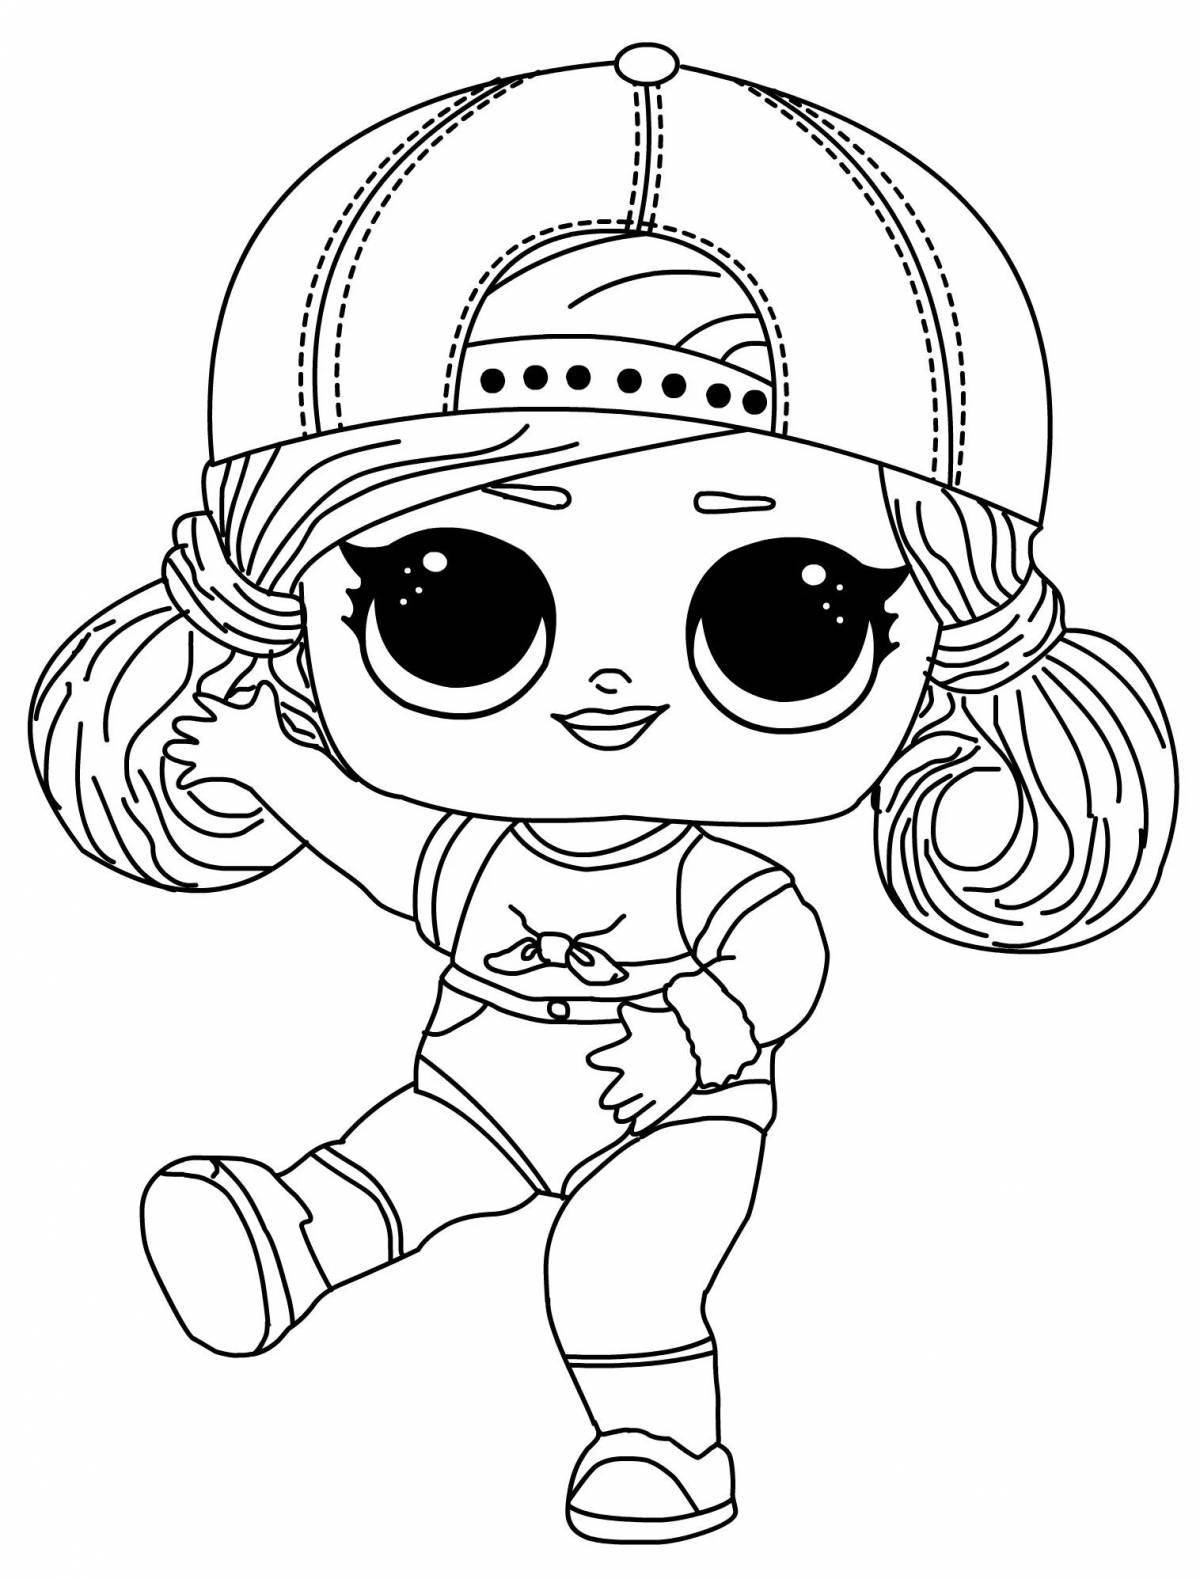 Radiant coloring page loo